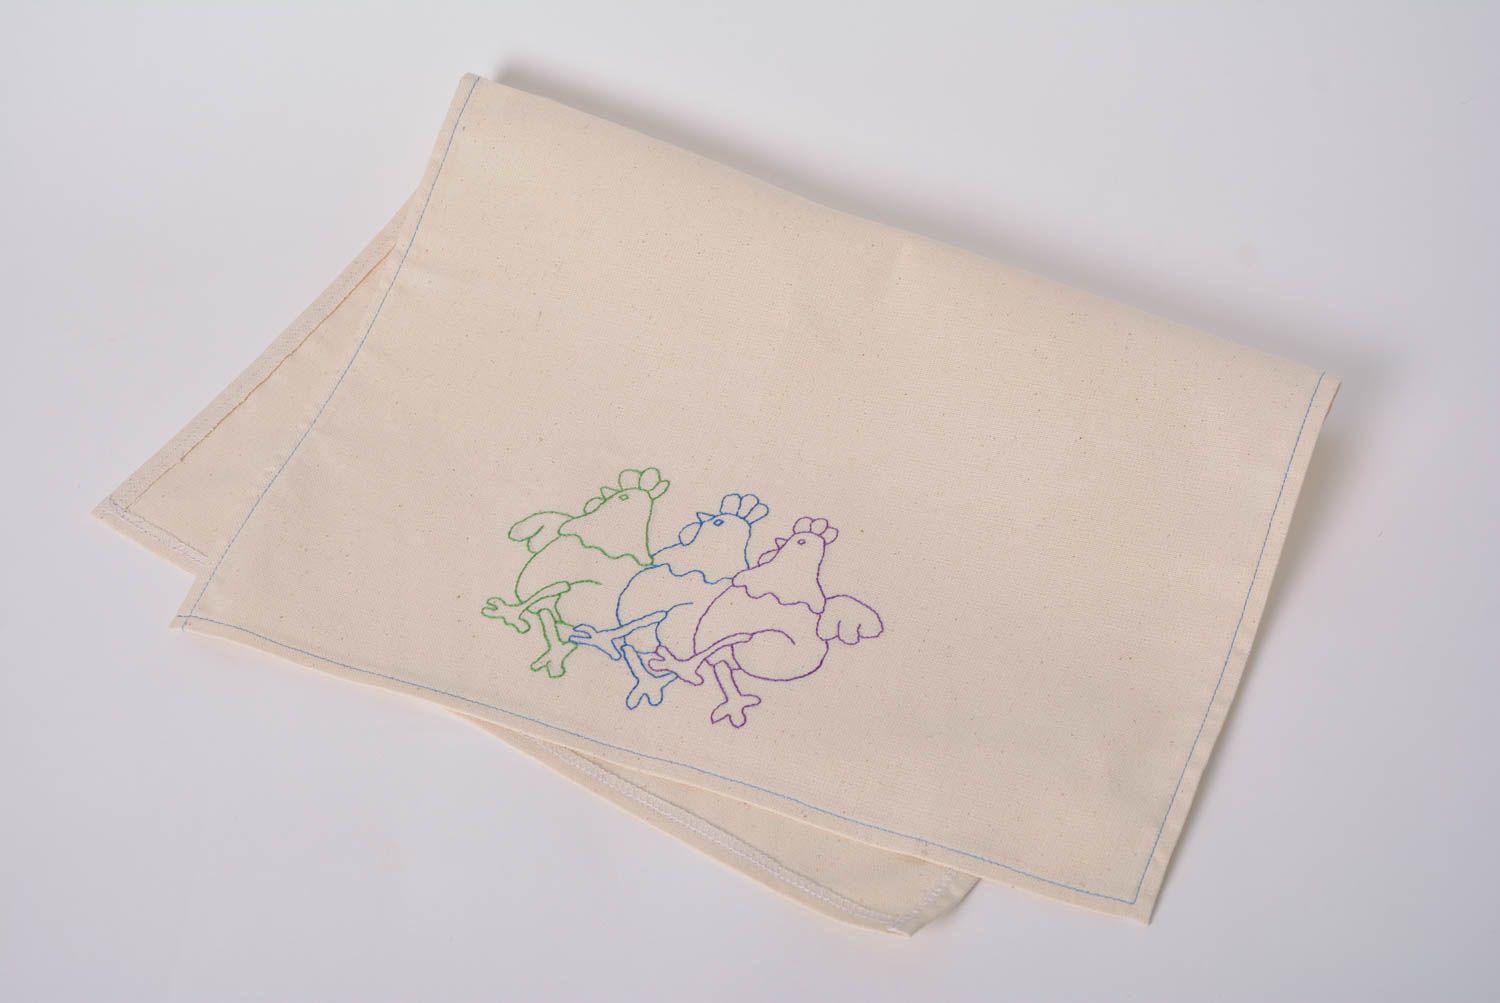 Handmade tea towel made of natural fabric with embroidery kitchen decor ideas photo 1